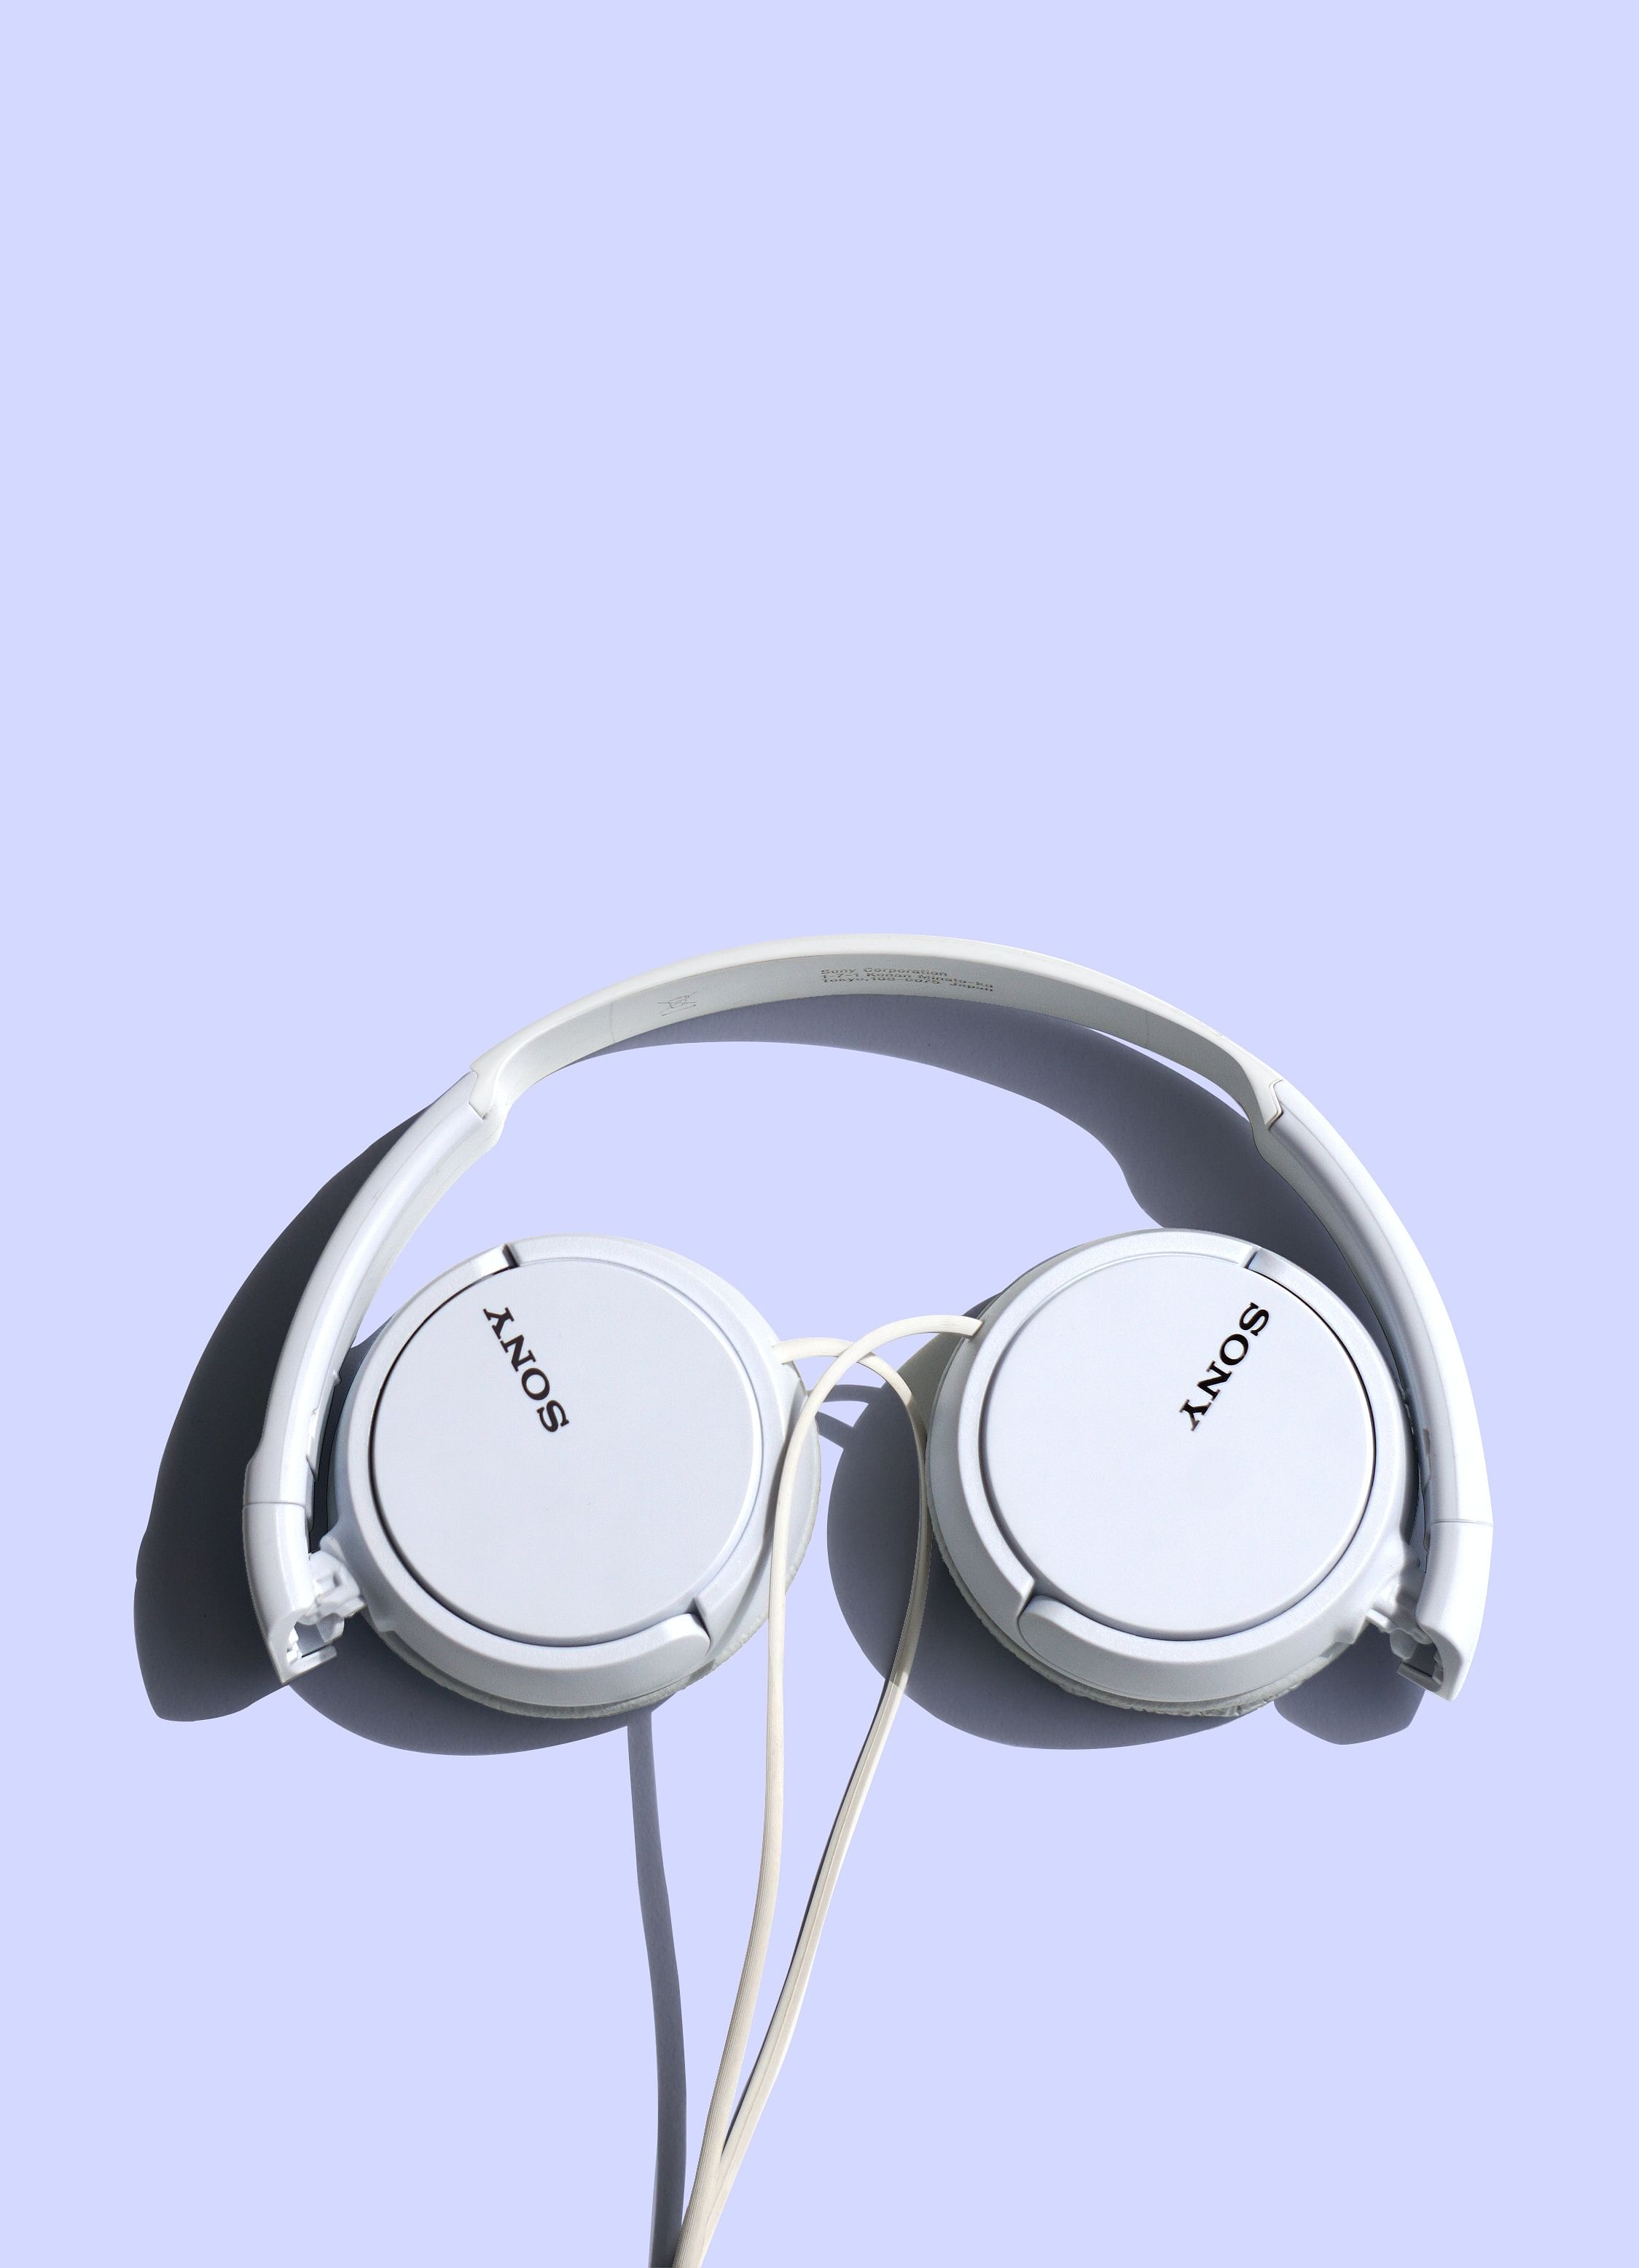 A pair of high-quality podcasting headphones